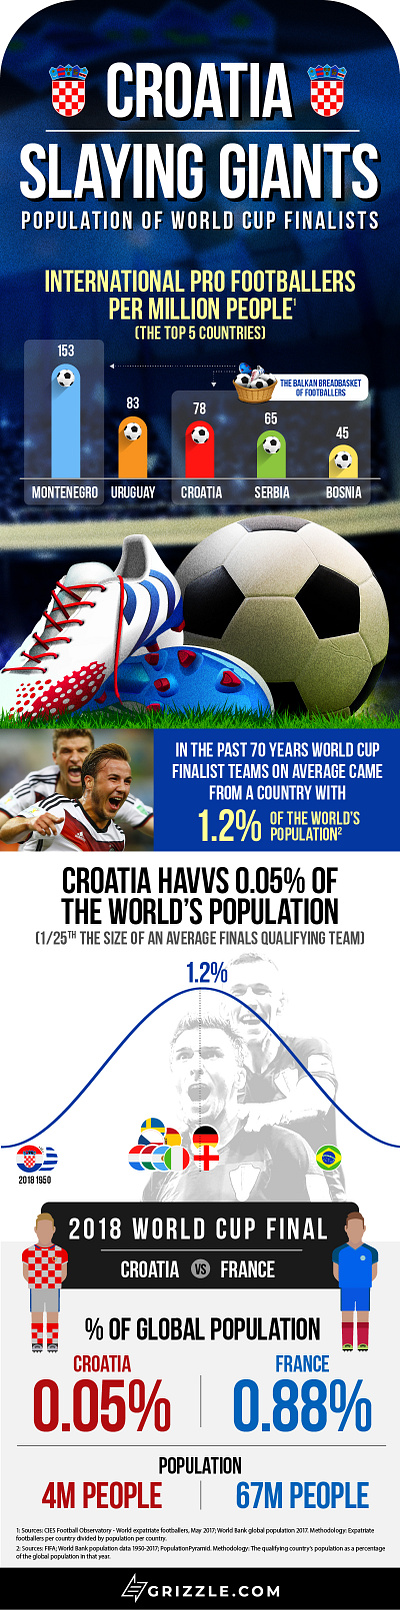 World Cup 2018 Infographic art direction graphic design infographic